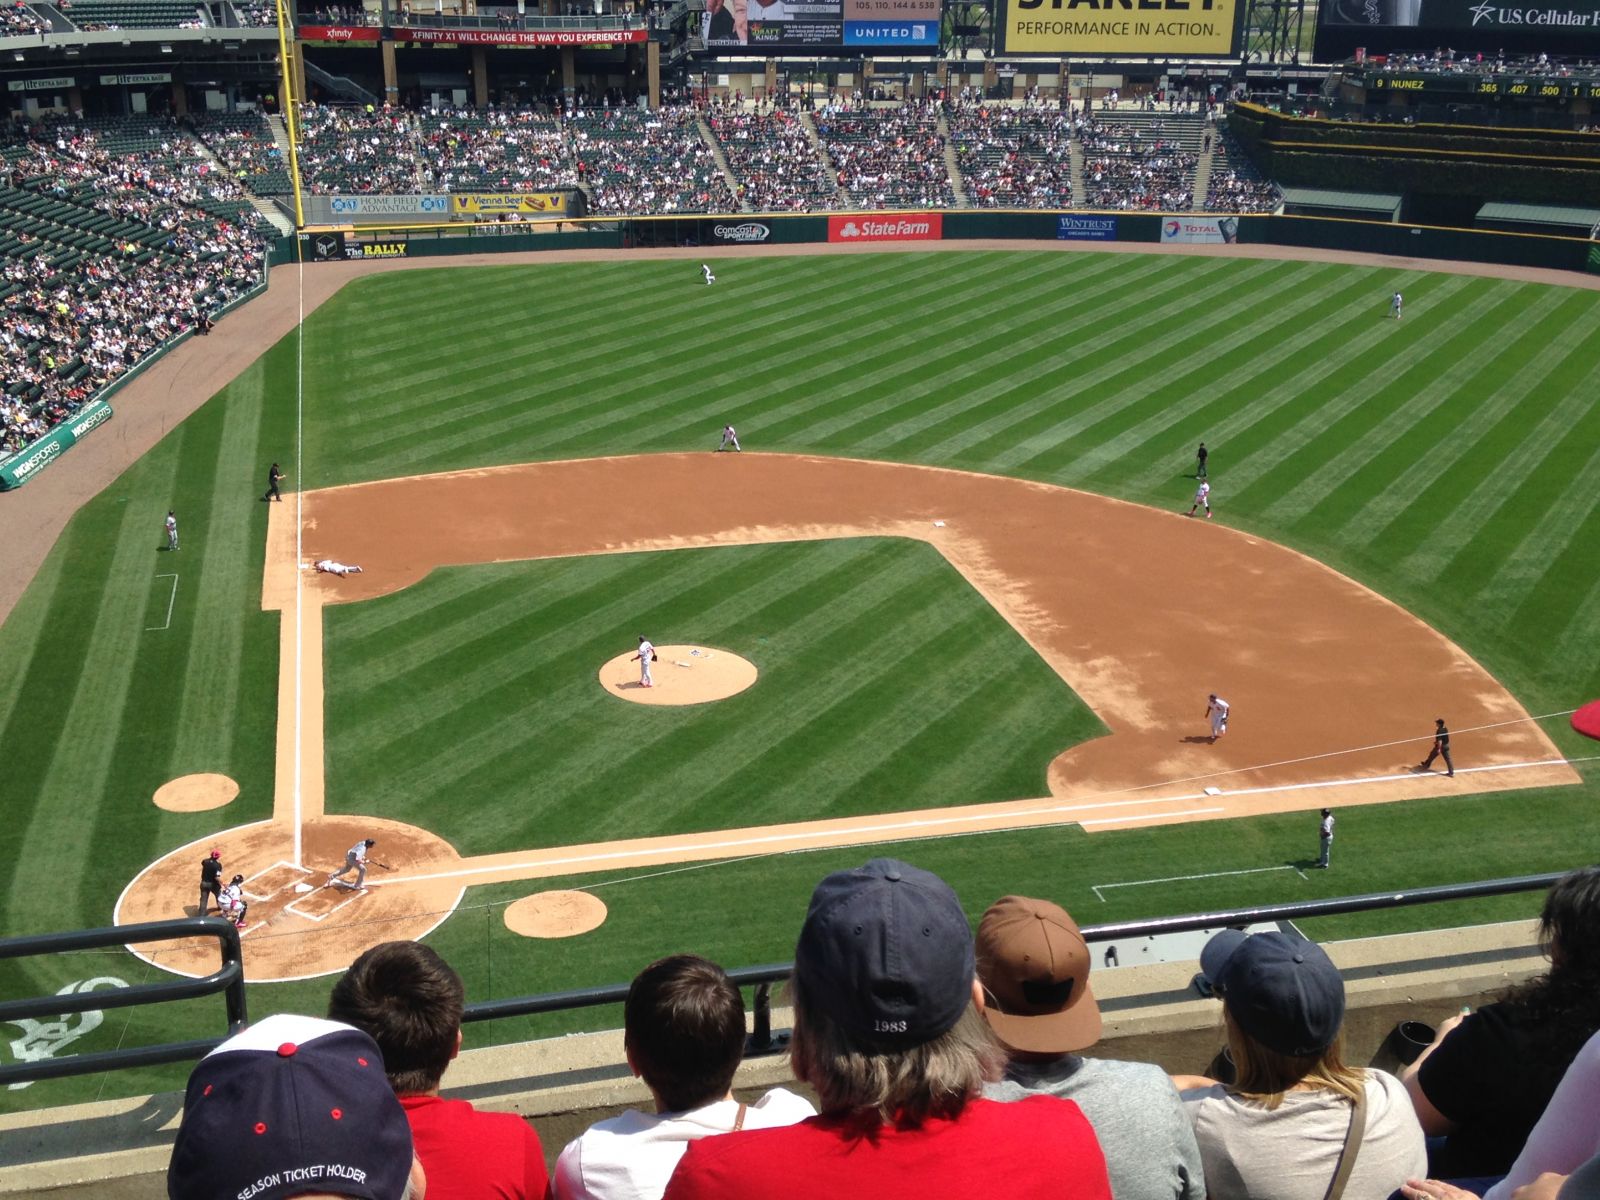 section 527, row 5 seat view  - guaranteed rate field